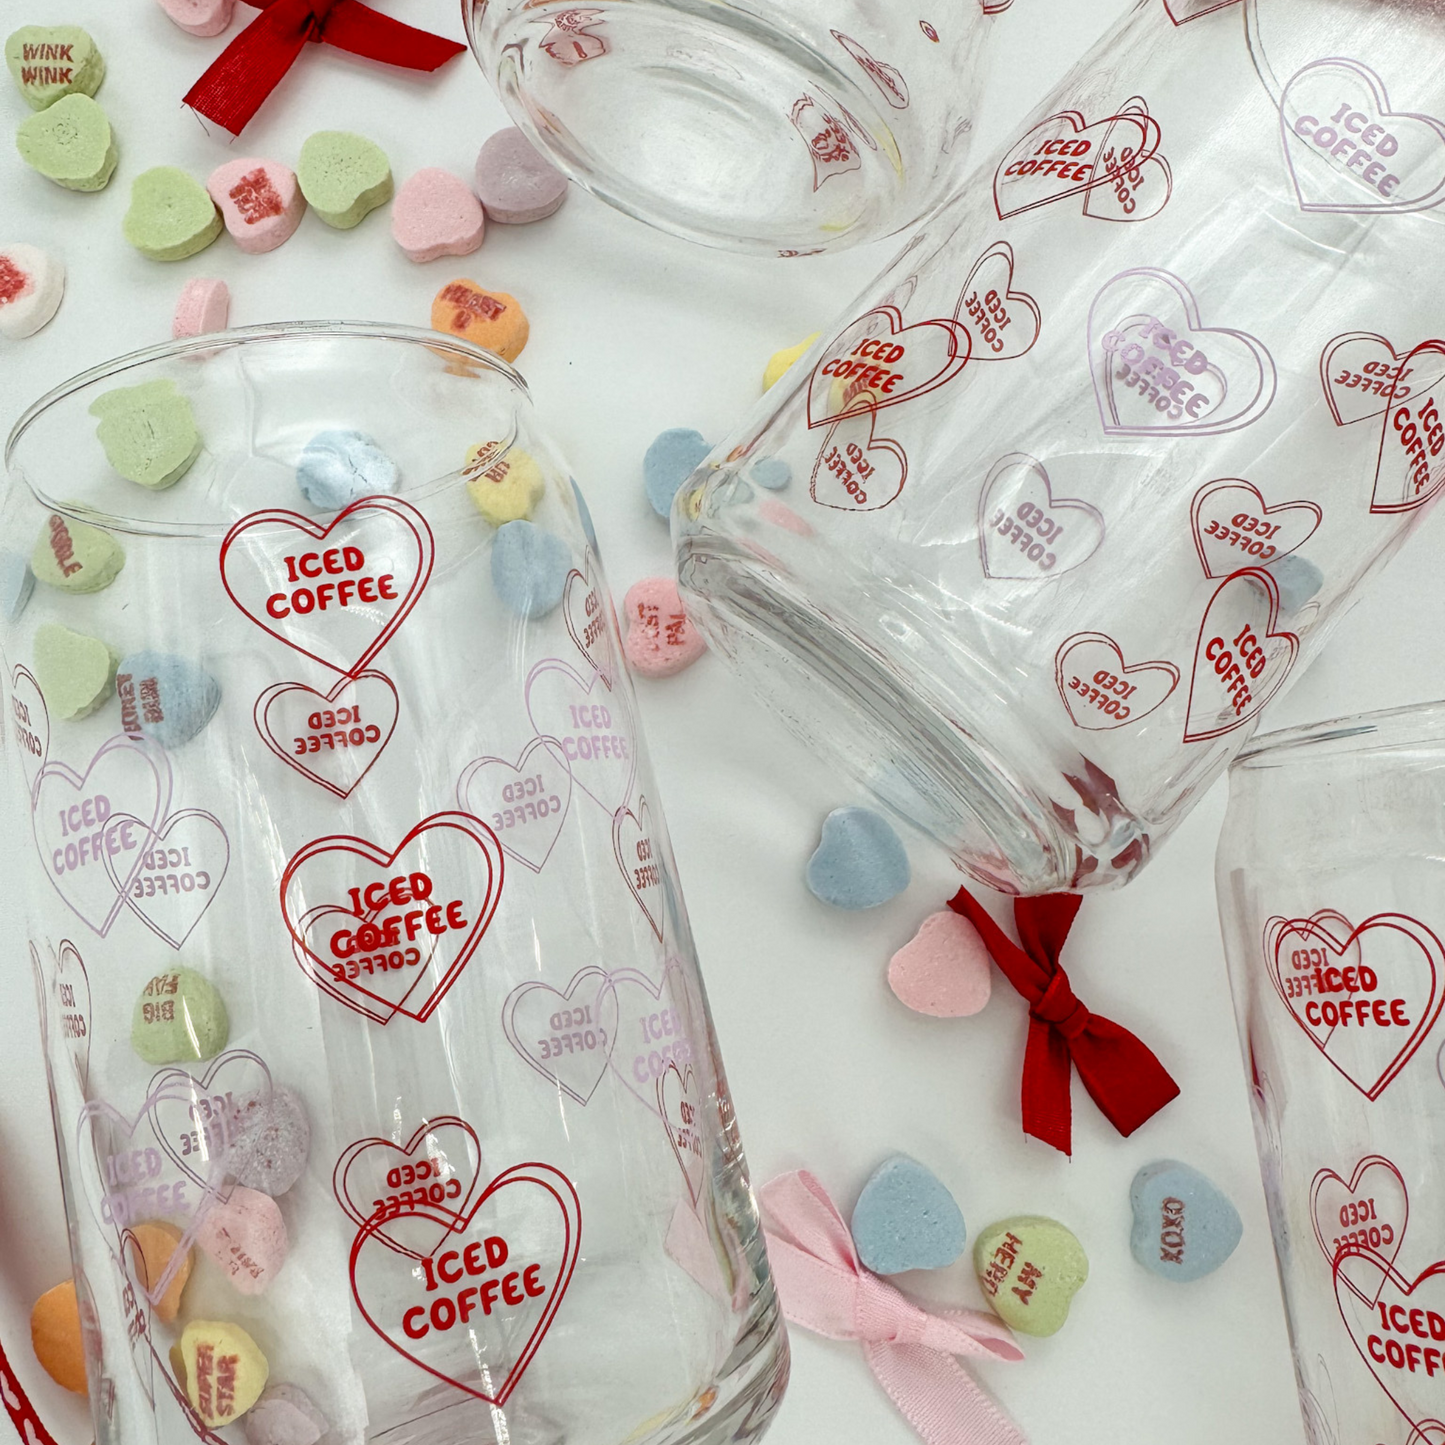 16 oz Iced Coffee Candy Heart Glass Cup